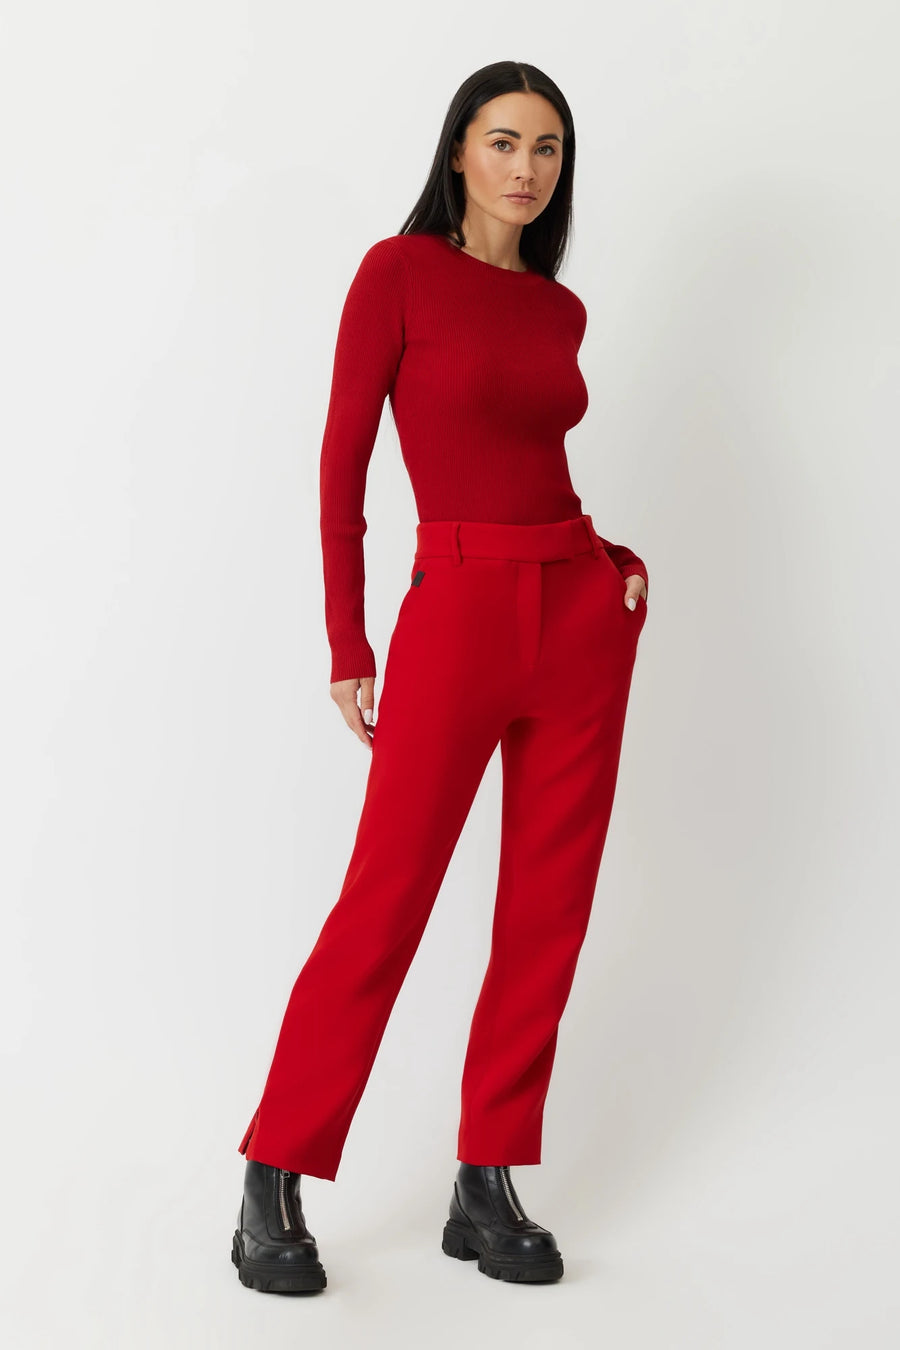 The Nelly straight leg trousers Japanese twill in lipstick red by Greyven 